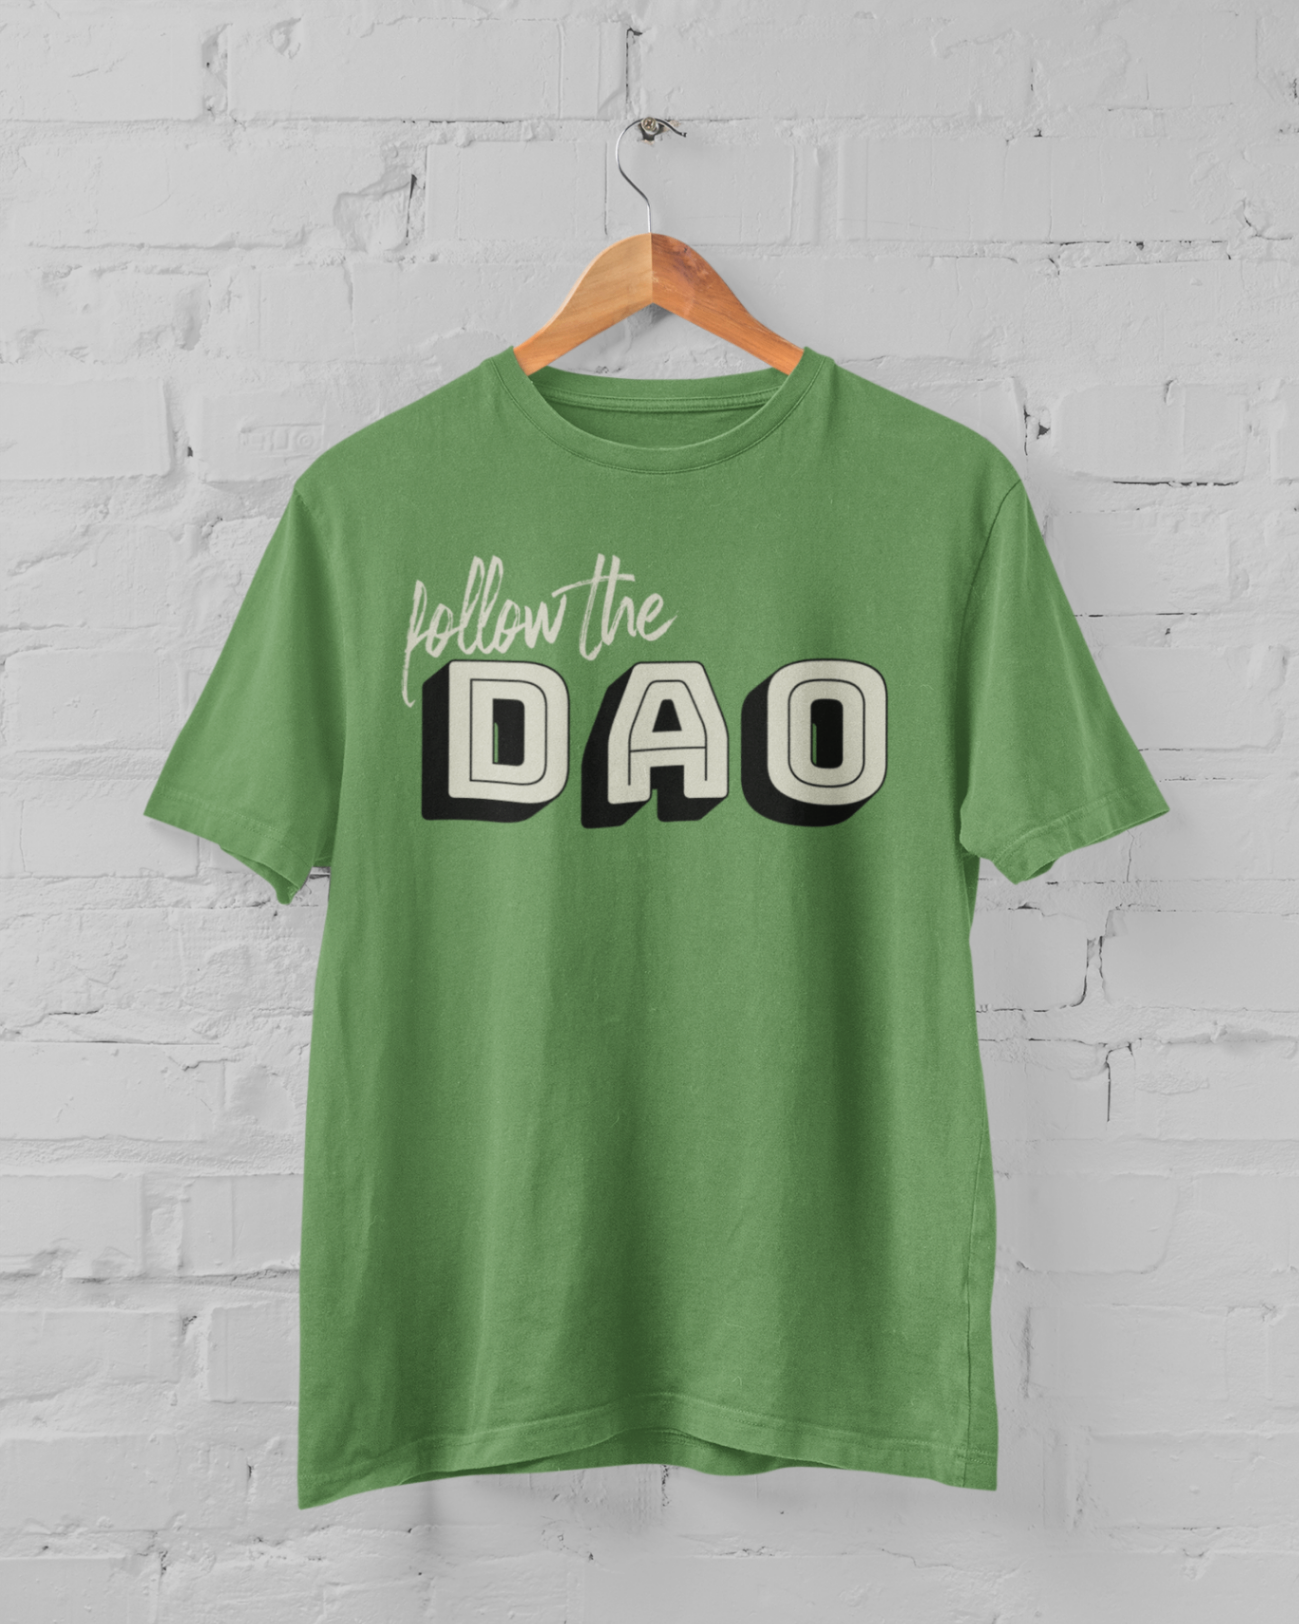  a leaf coloured t shirt with the follow the dao design on a hangar in front of a white brick backround